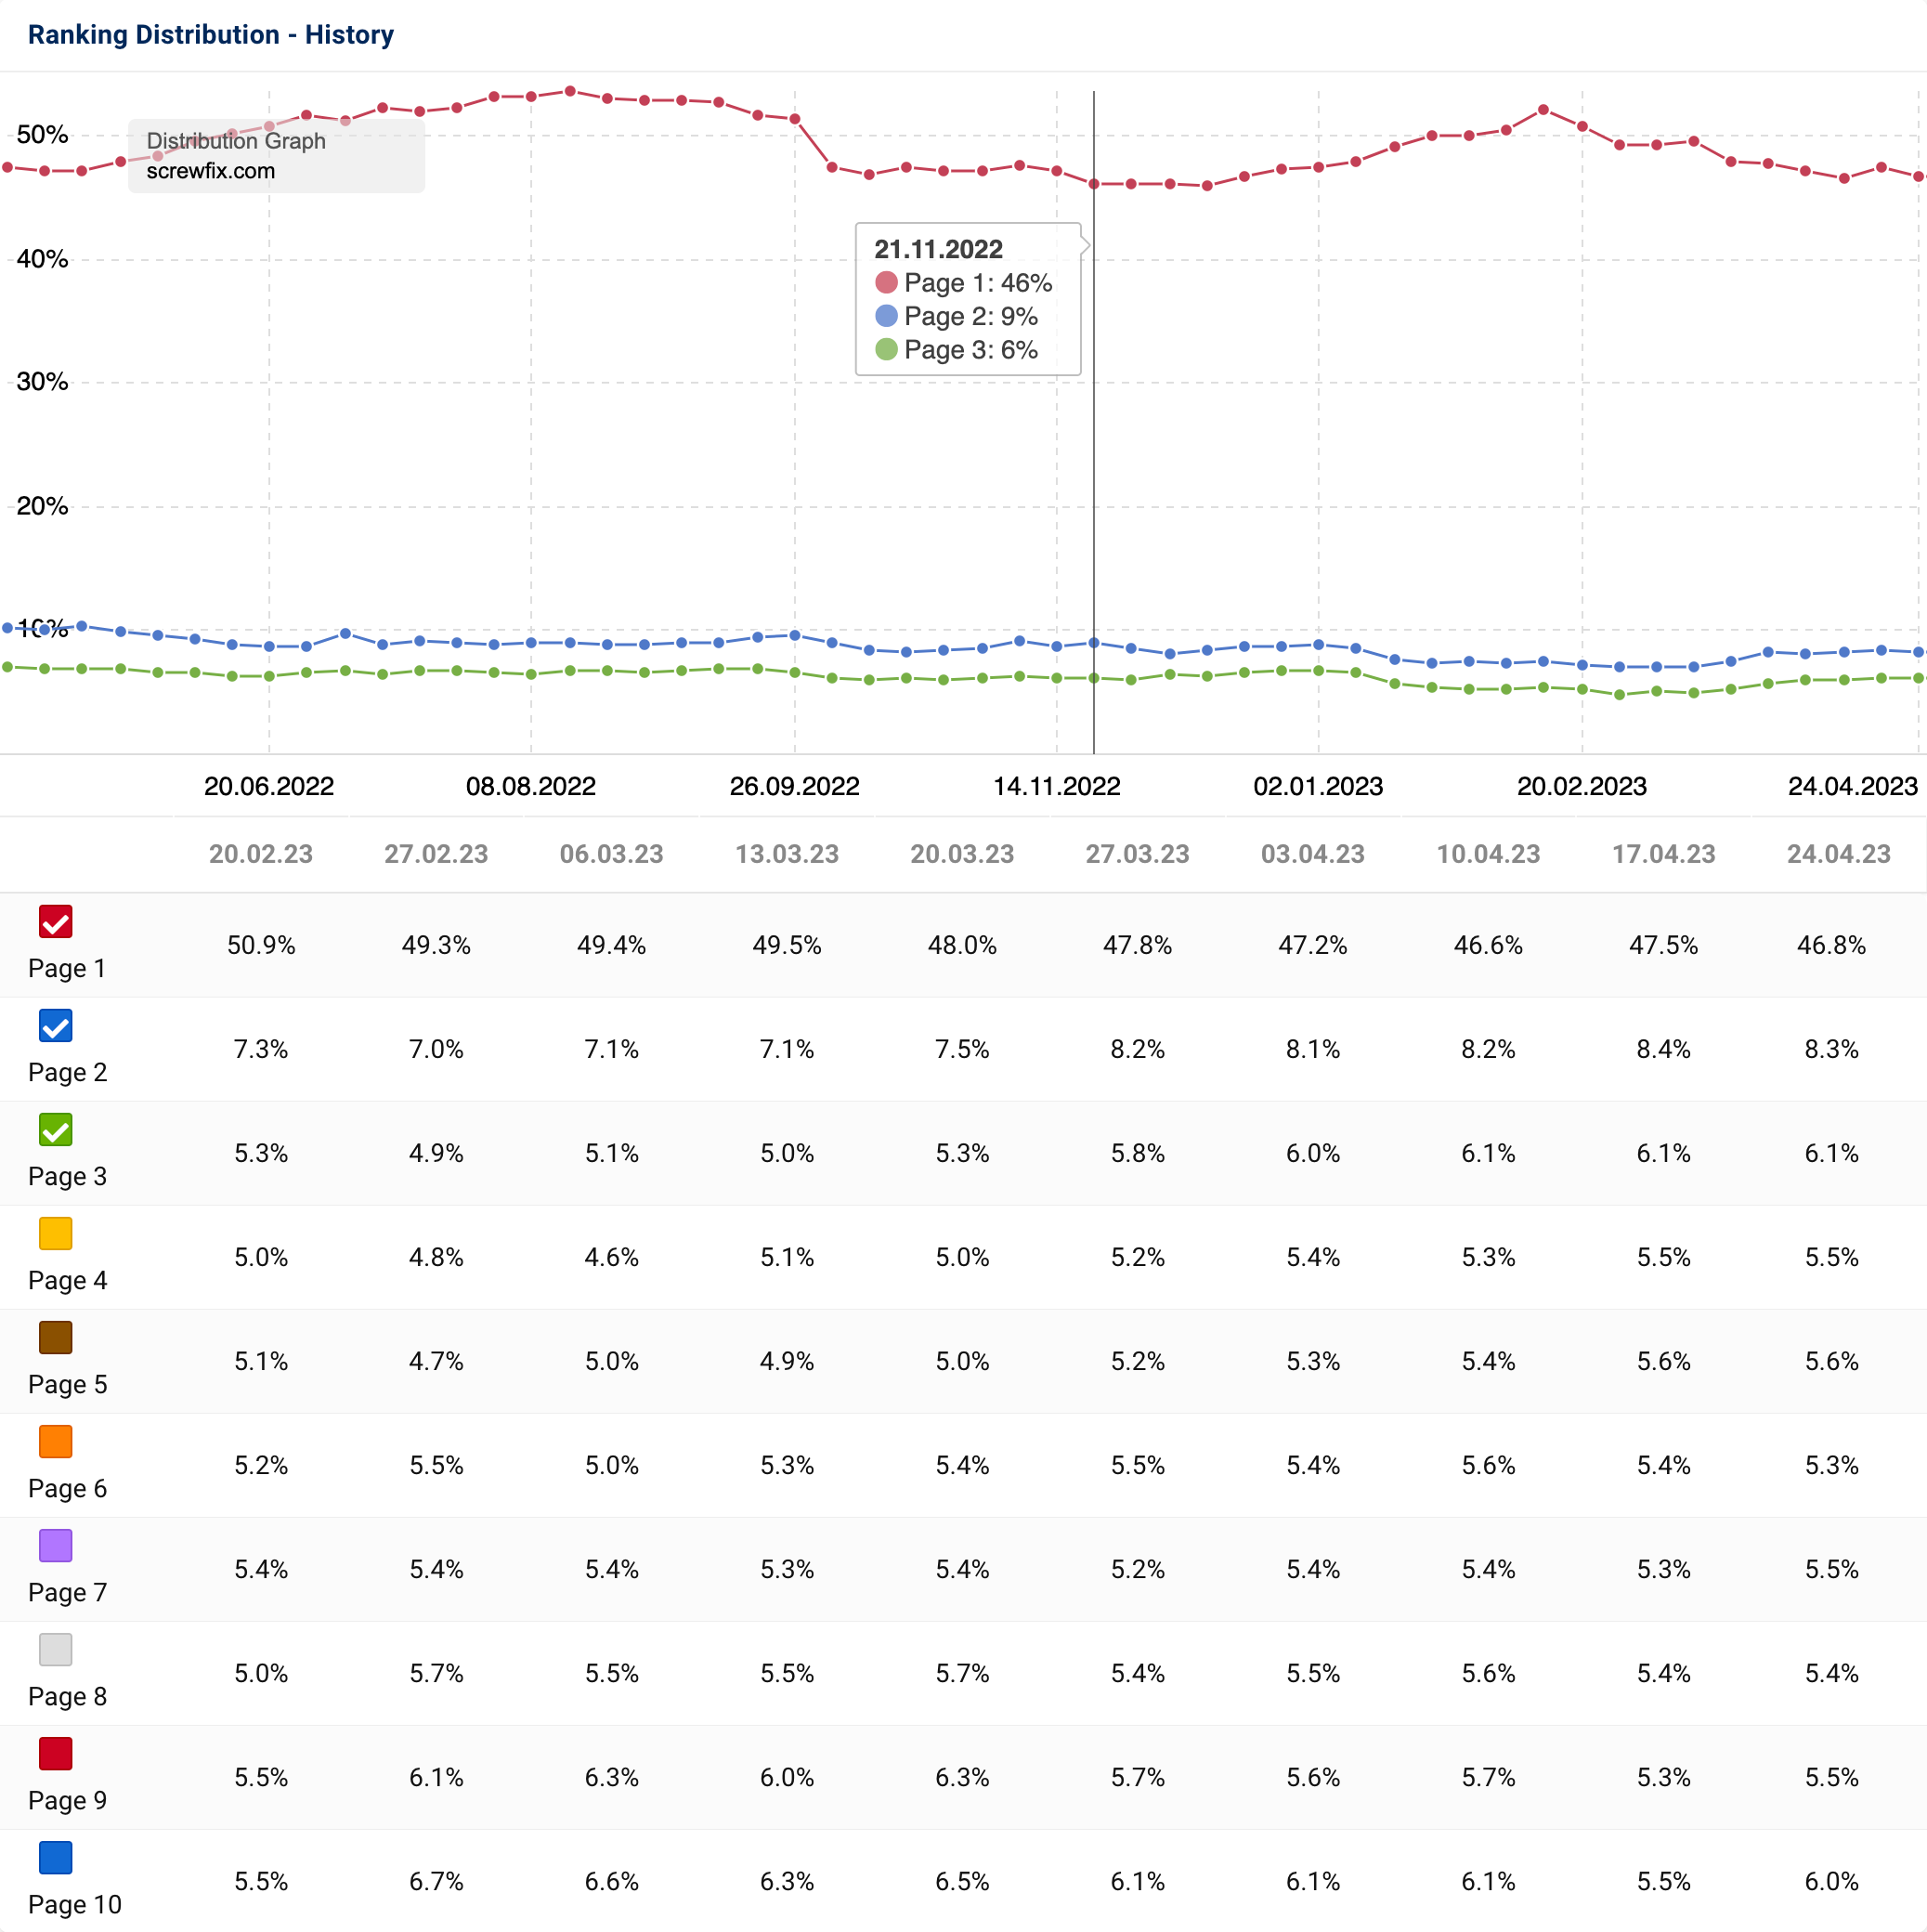 The historical ranking distribution of the domain screwfix.com across the various Google pages in a curve diagram. Below this, a table with the percentage shares of the rankings of the corresponding Google page with small, colourful checkboxes in each row.